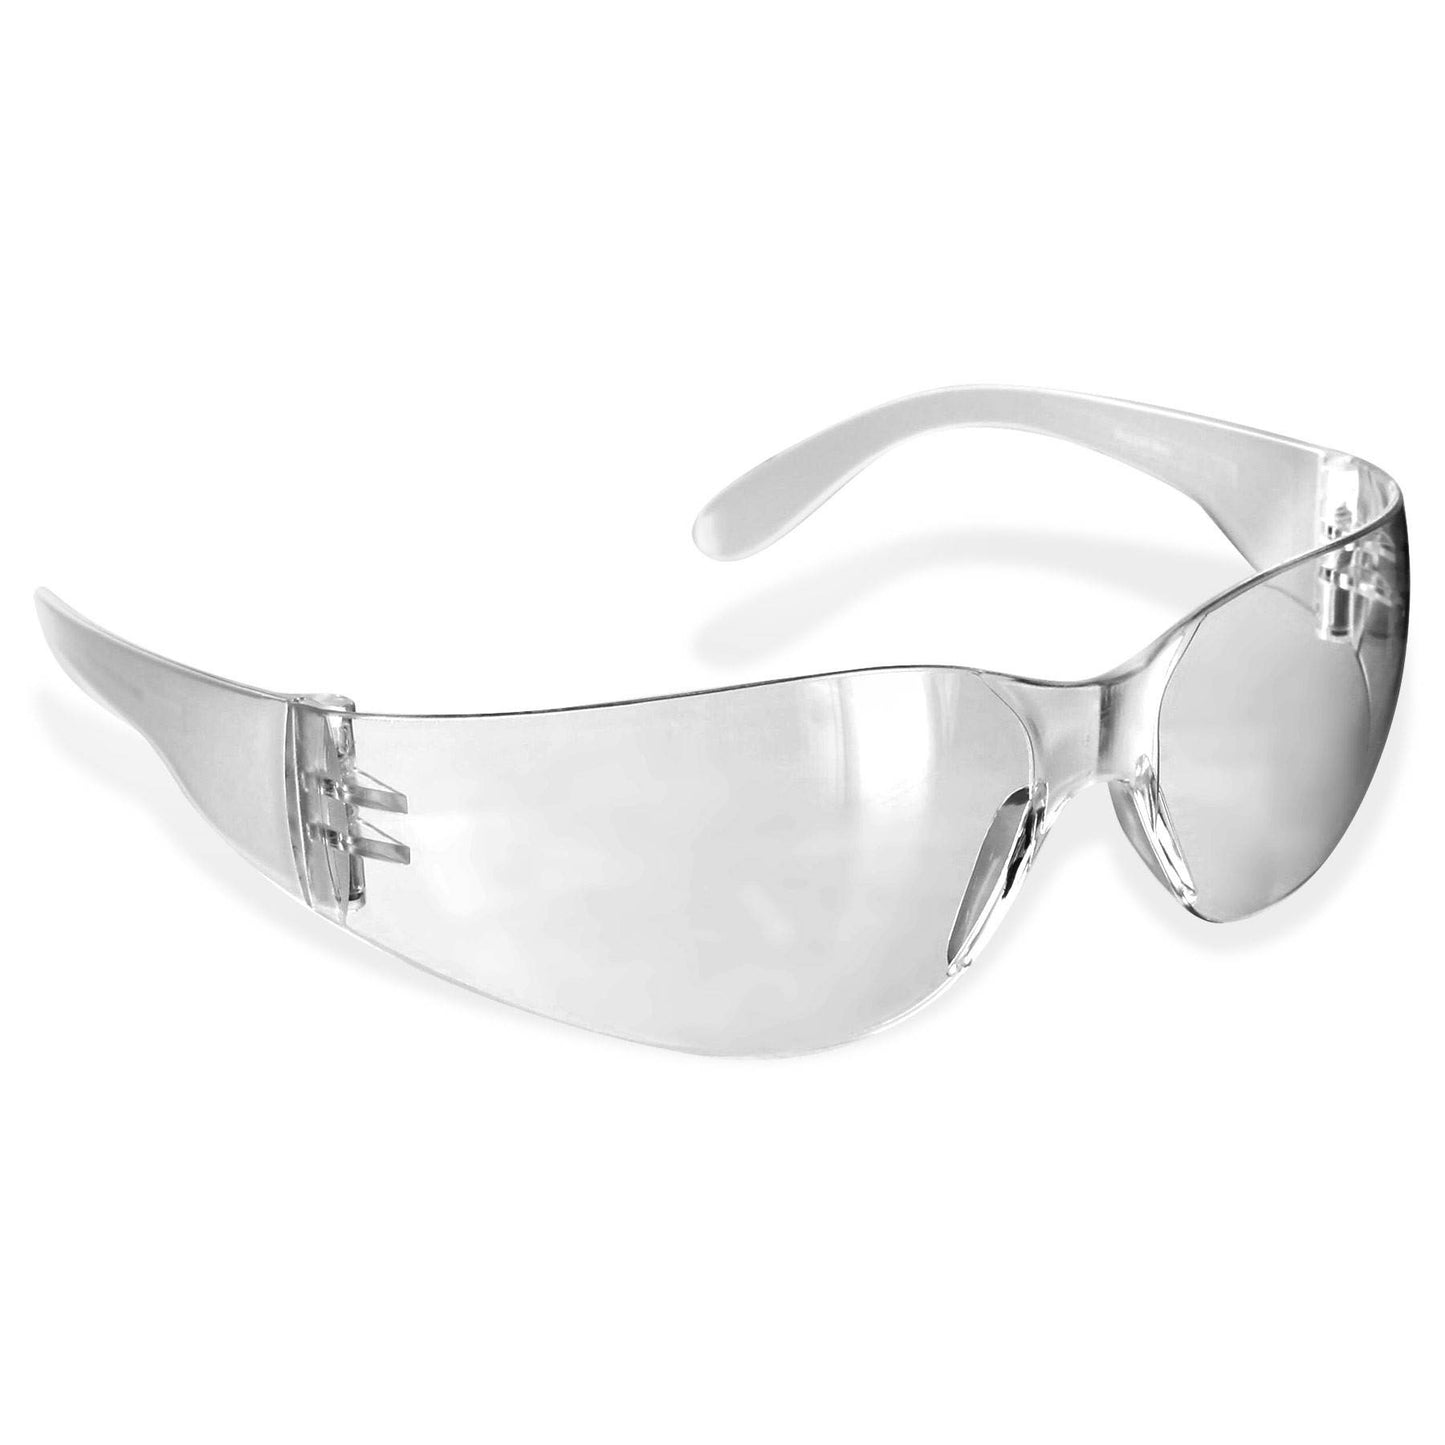 Eye protection / Safety glasses (Great for shop and gameplay use) CLEAR or SMOKE